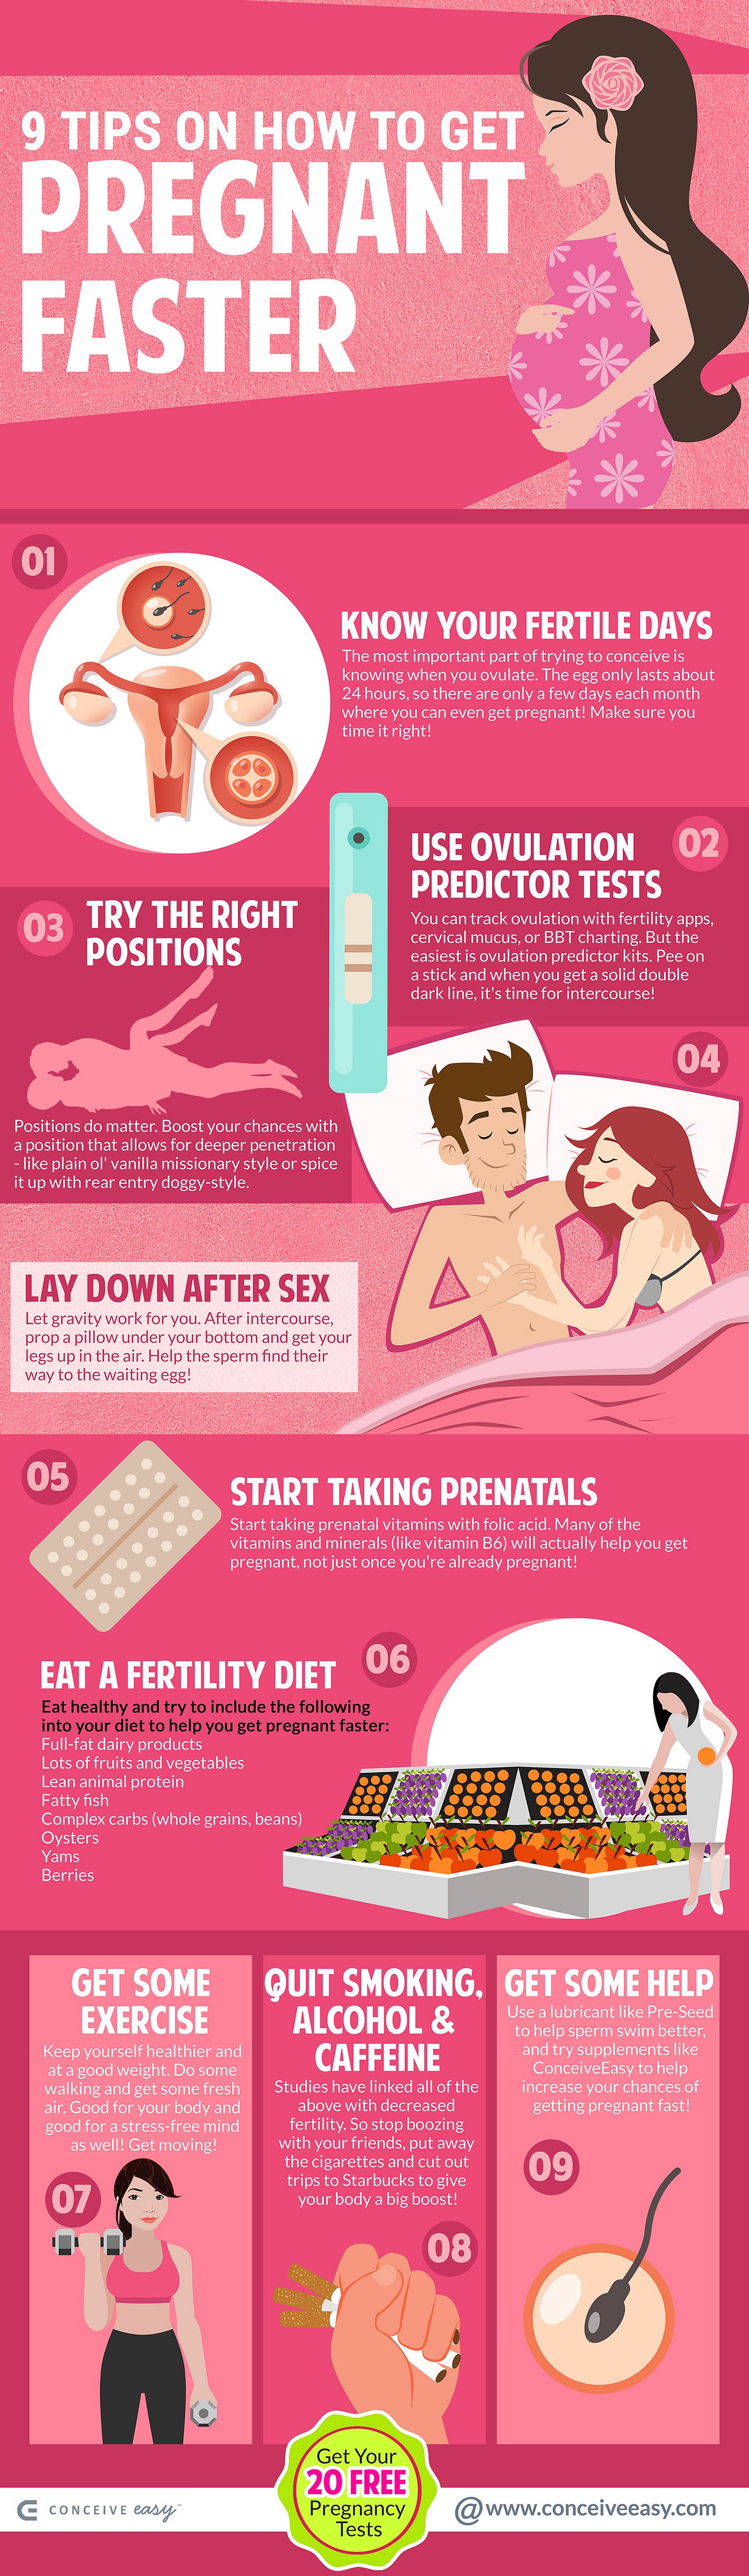 9 Tips on How to Get Pregnant Faster Infographic